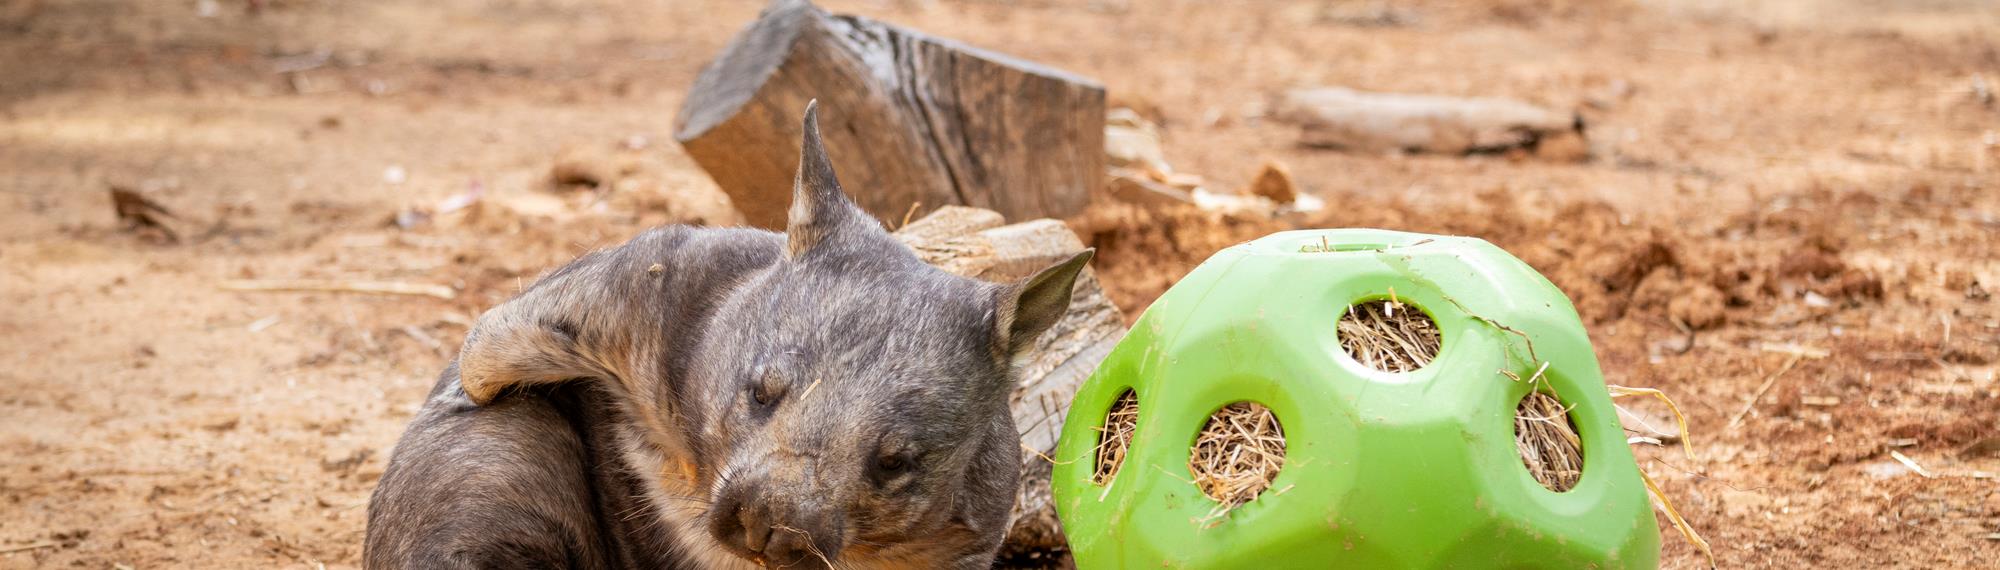 A Wombat sitting next to a hollow green enrichment ball (polyhedron) filled with grass.